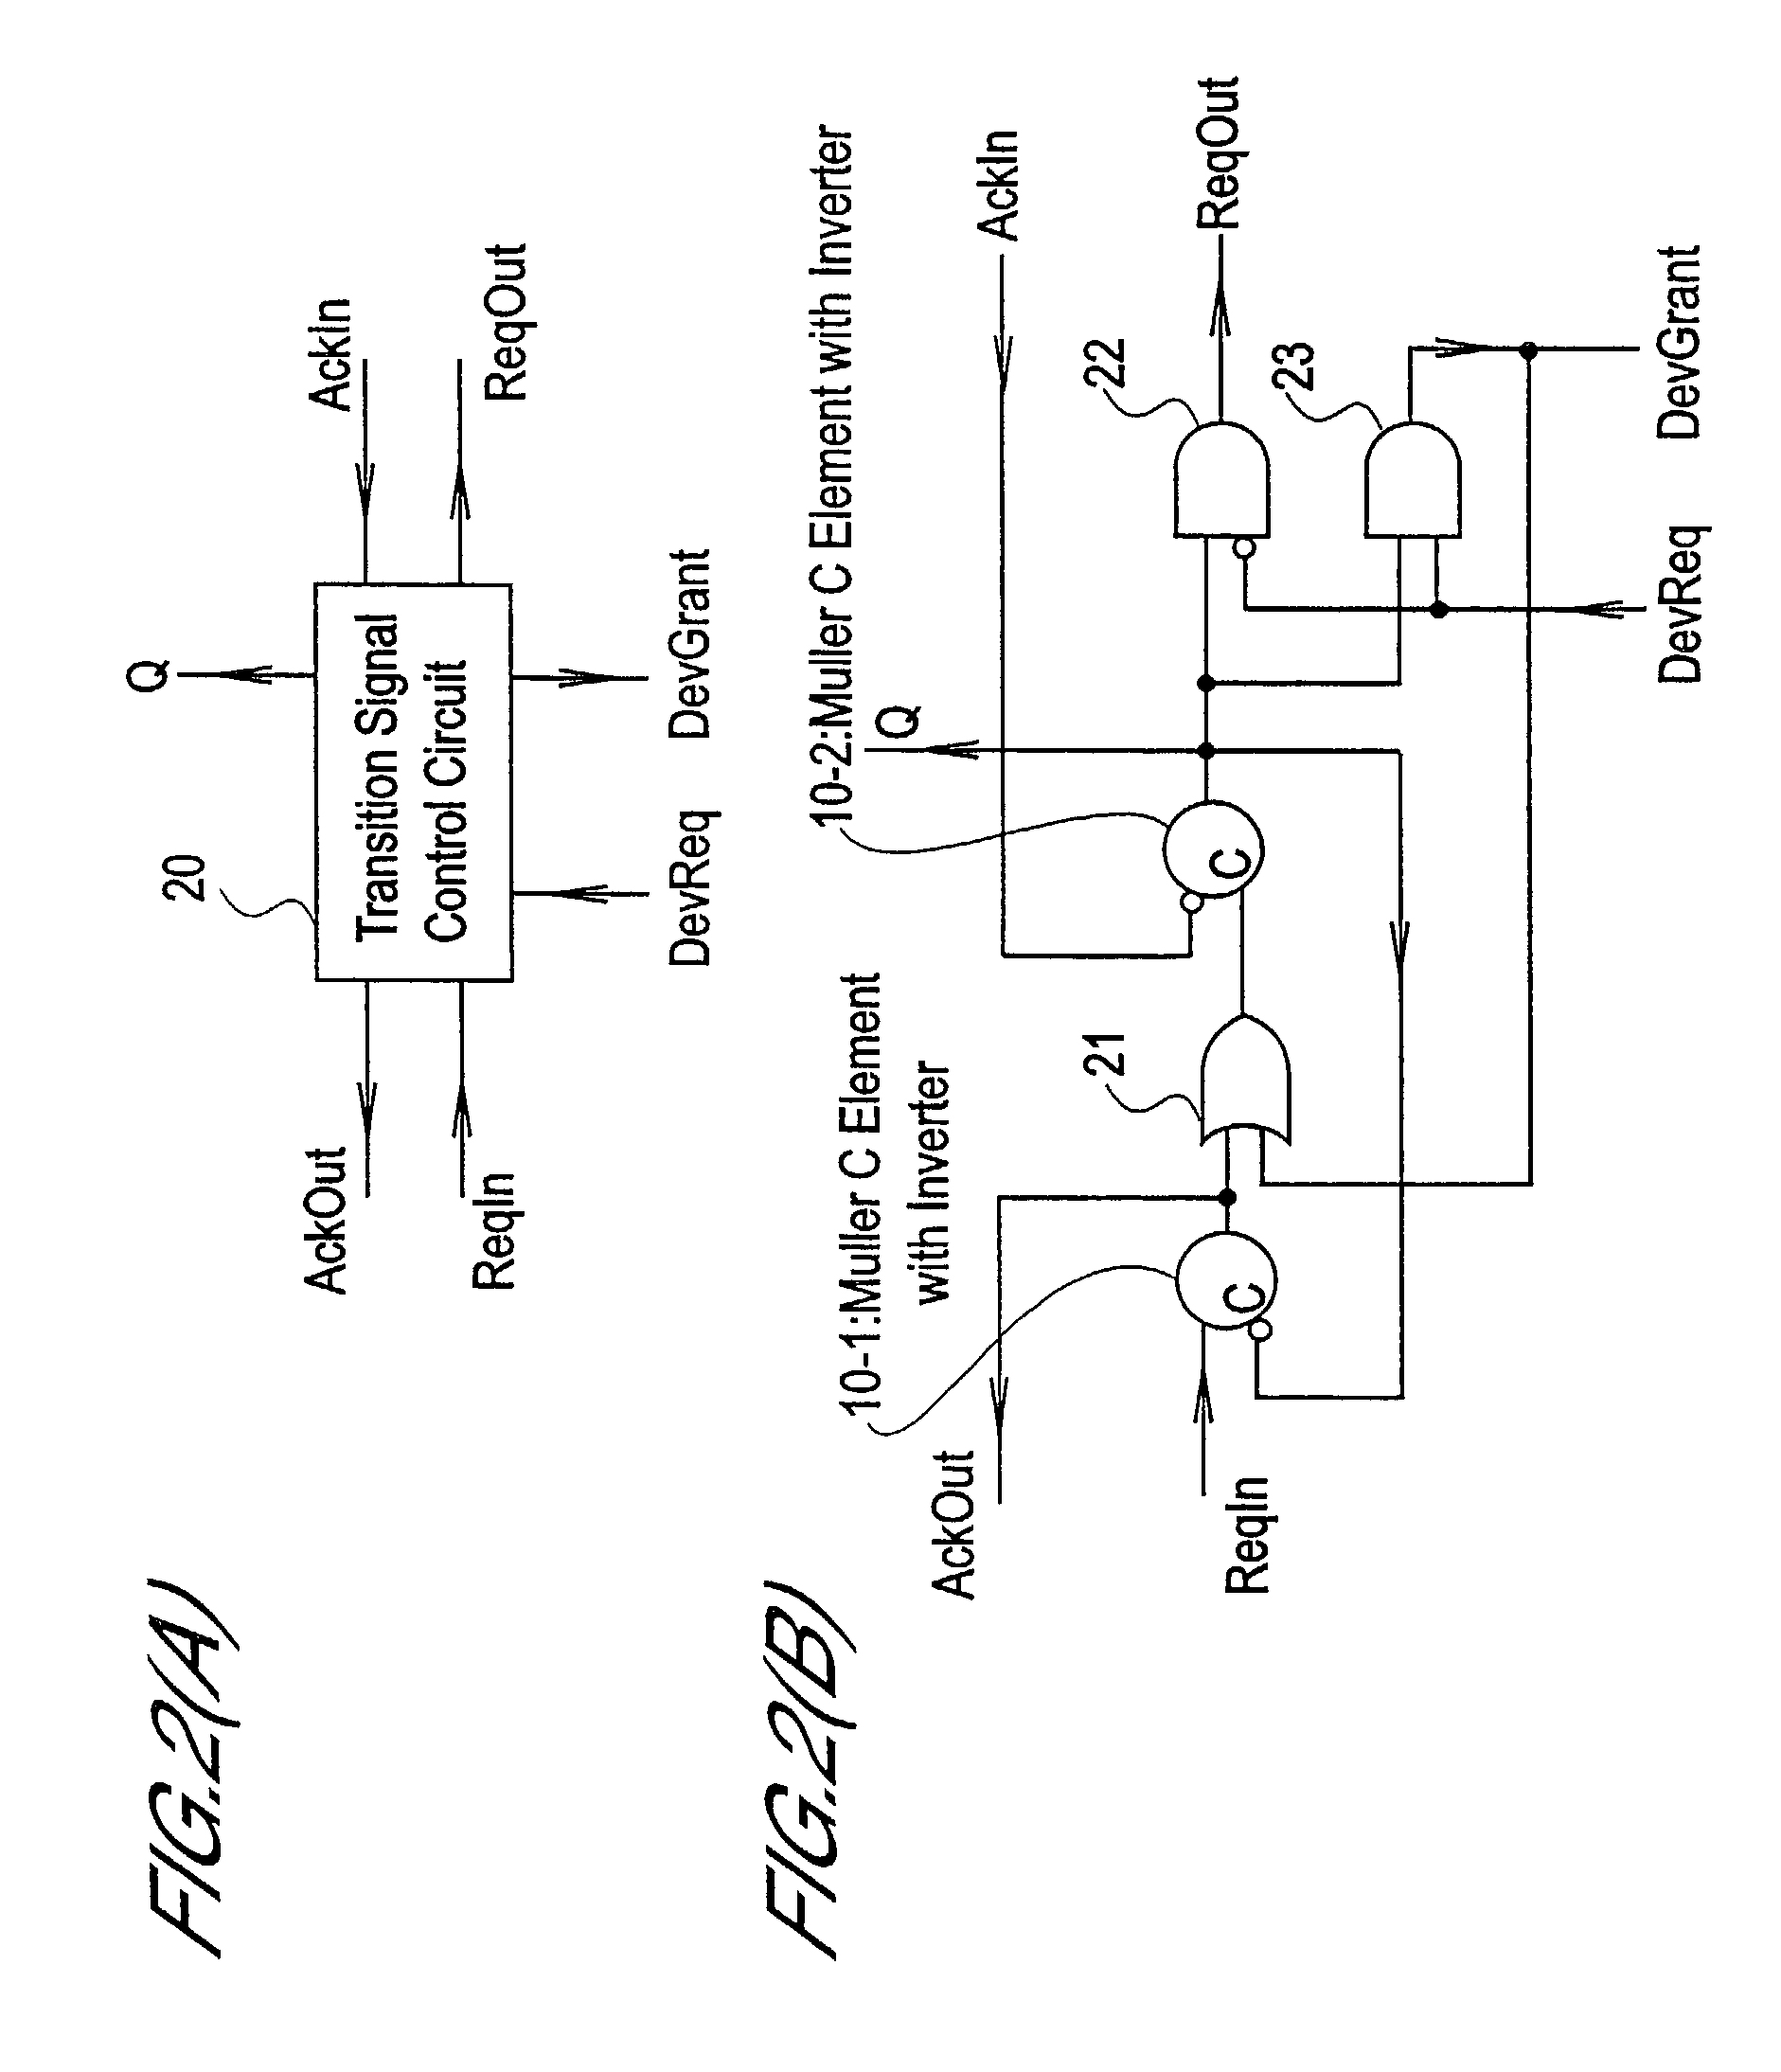 Transition signal control unit and DMA controller and transition signal control processor using transition signal control unit